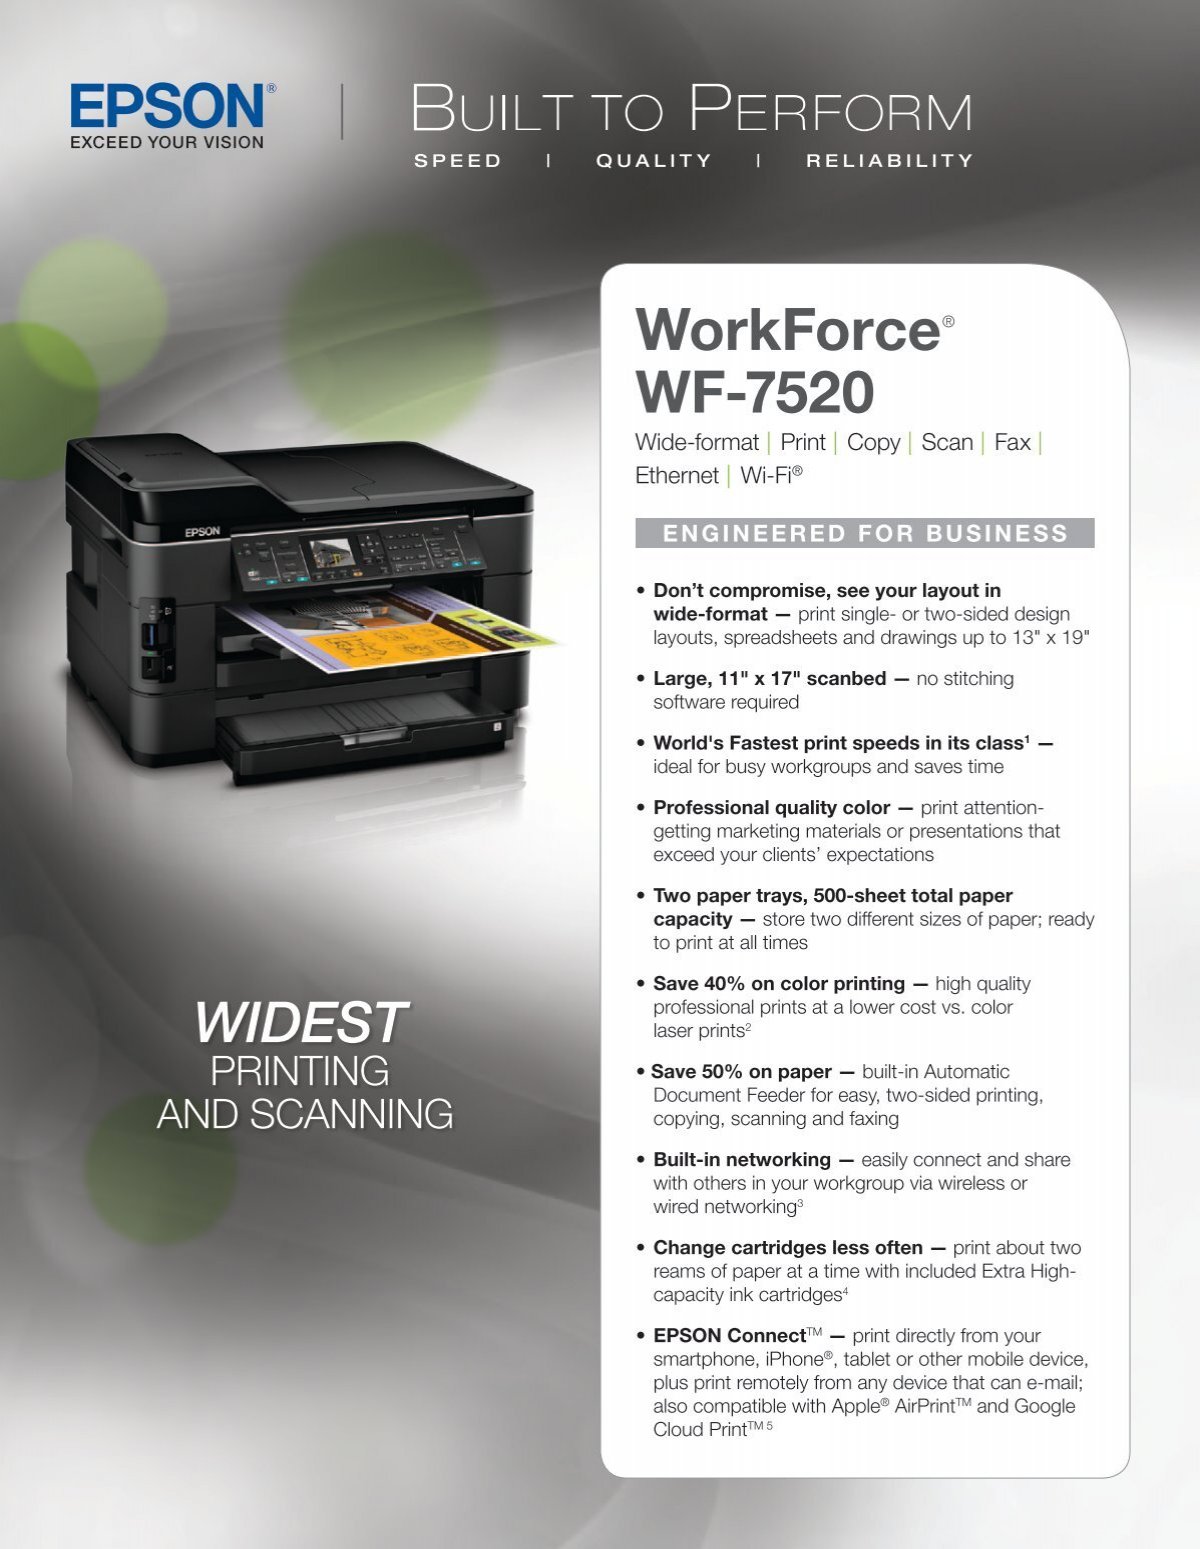 Epson Epson Workforce Wf 7520 All In One Printer Product Specifications 1070